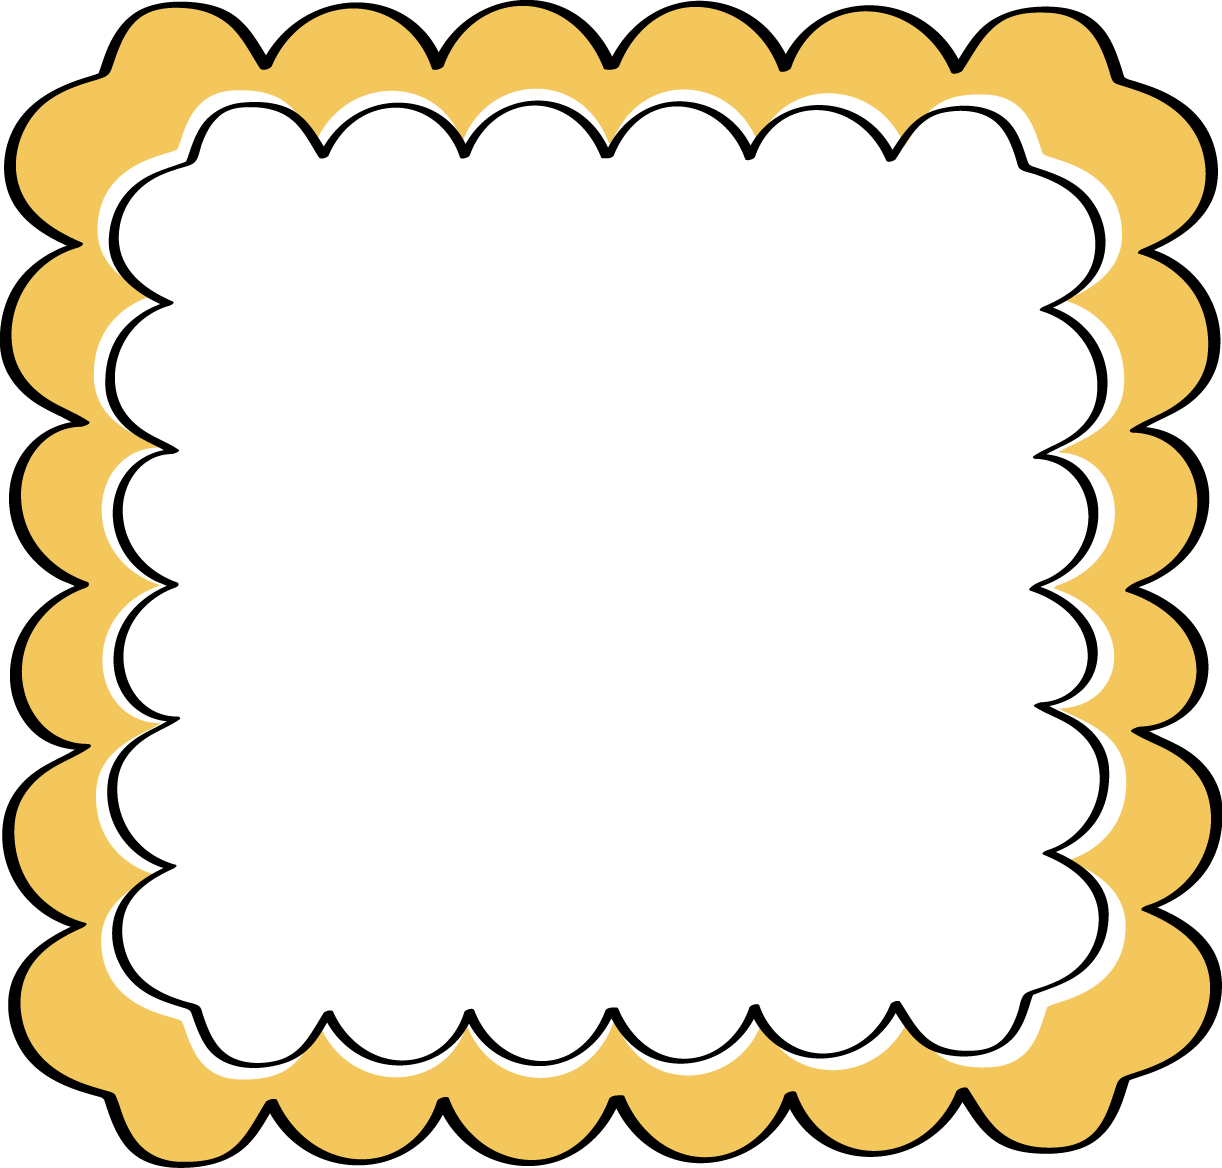 Yellow Scalloped Frame   Yellow And Black Scalloped Frame With An